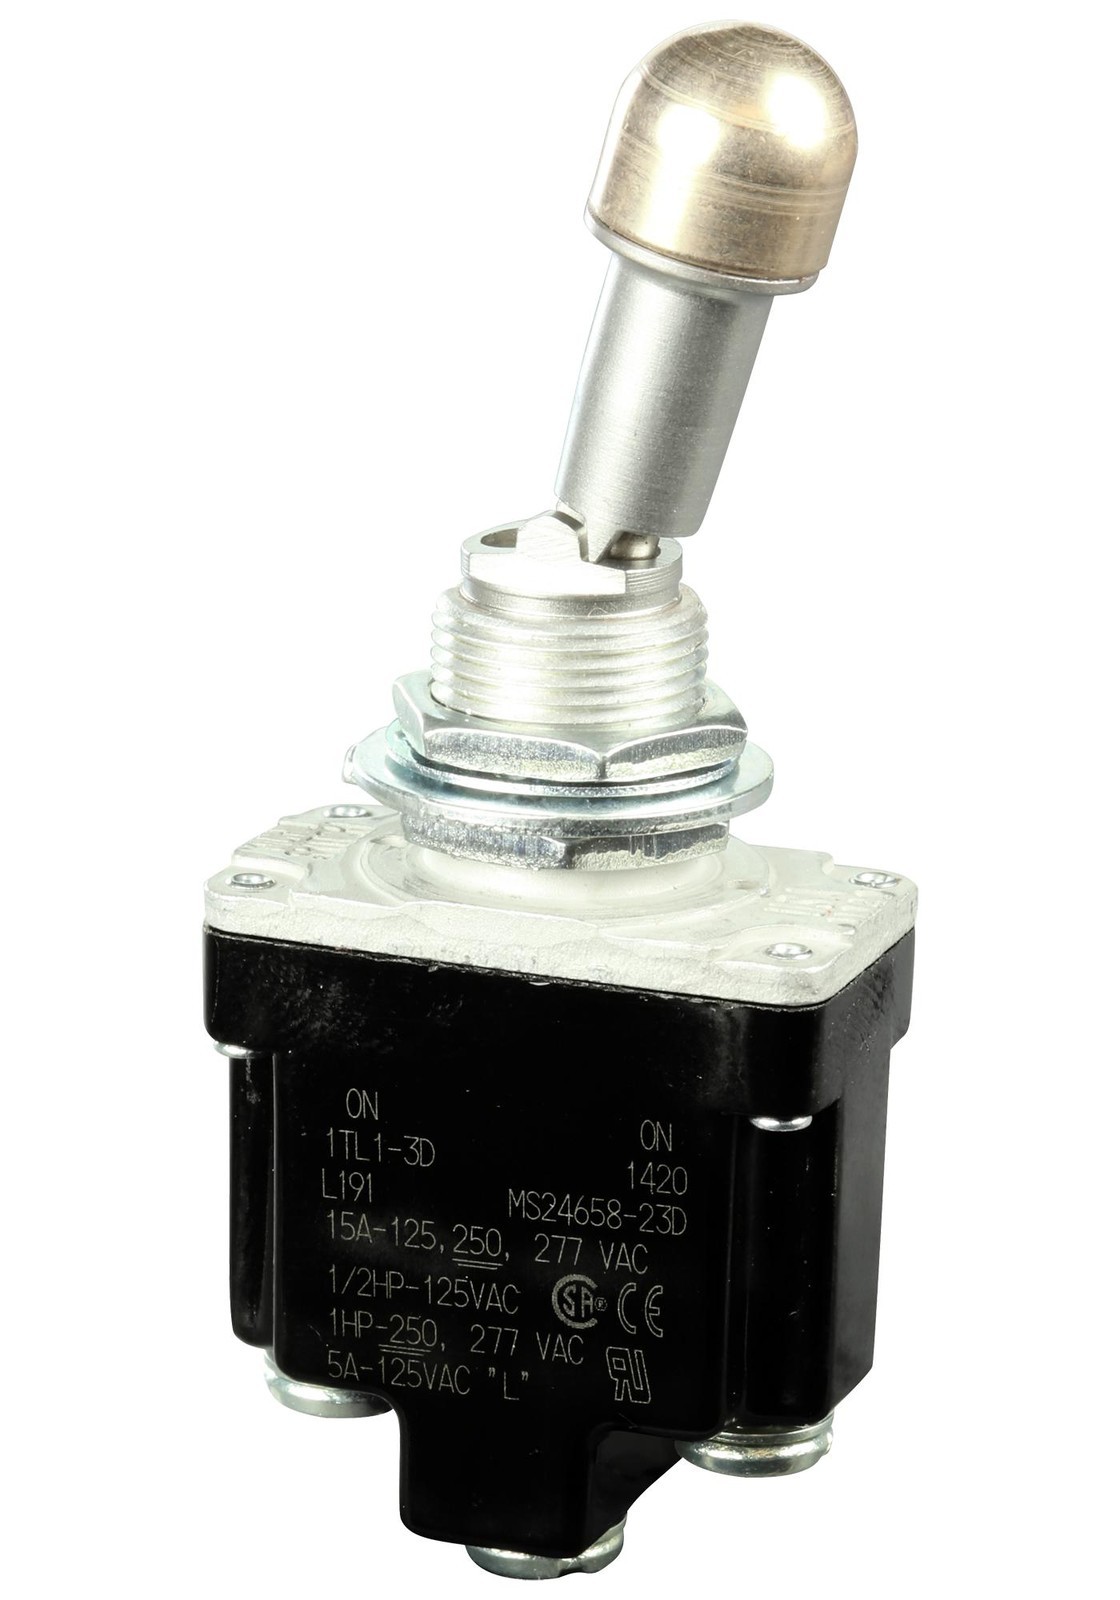 Honeywell 1Tl1-3D Toggle Switch, 1 Pole, On-On